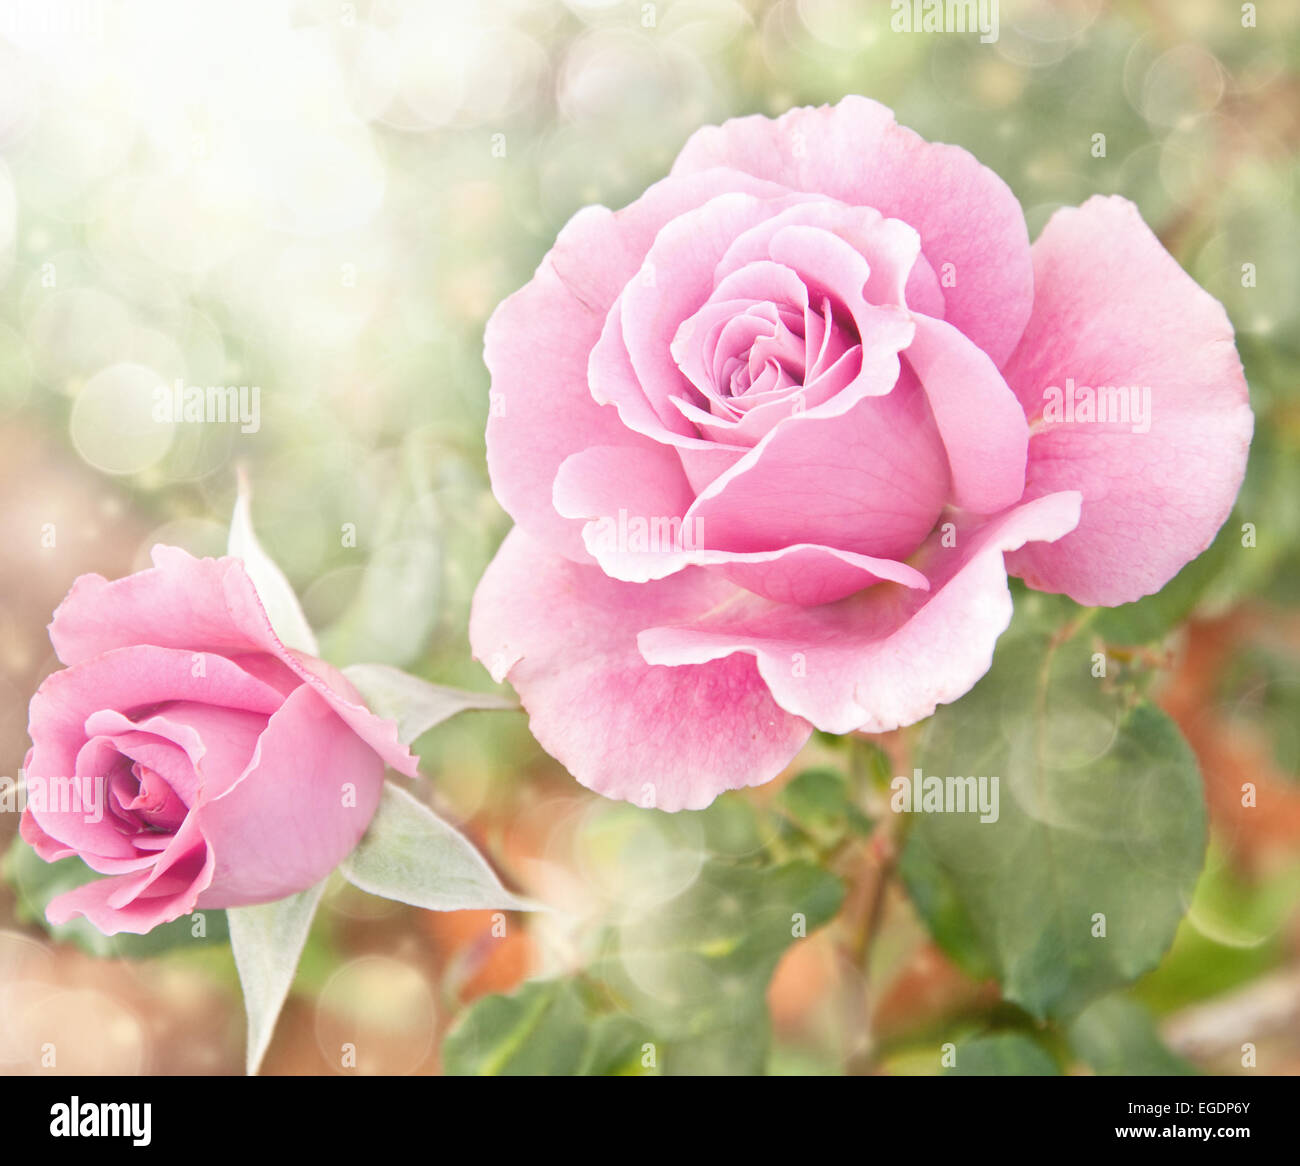 Dreamy image of a beautiful pink rose in the garden Stock Photo